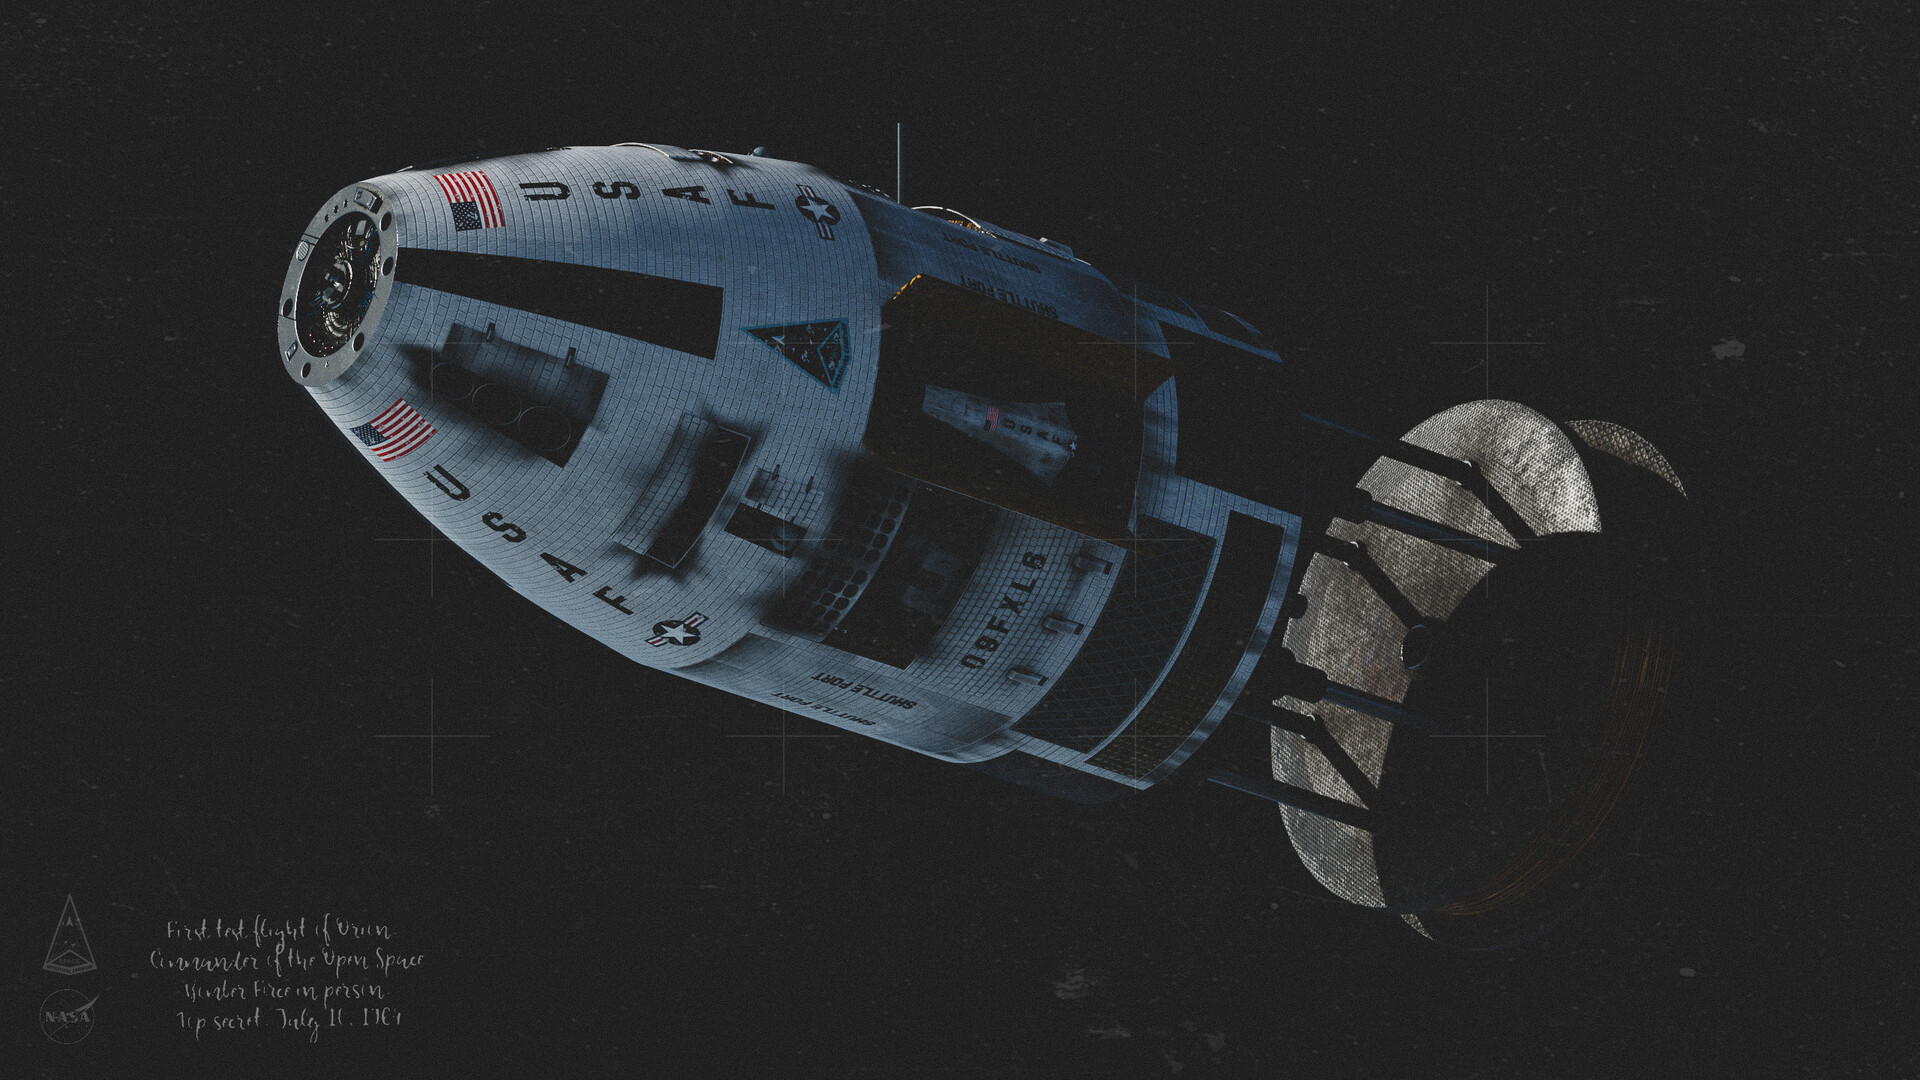 Crazy Cold War Concepts #4 Orion nuclear space battleship 